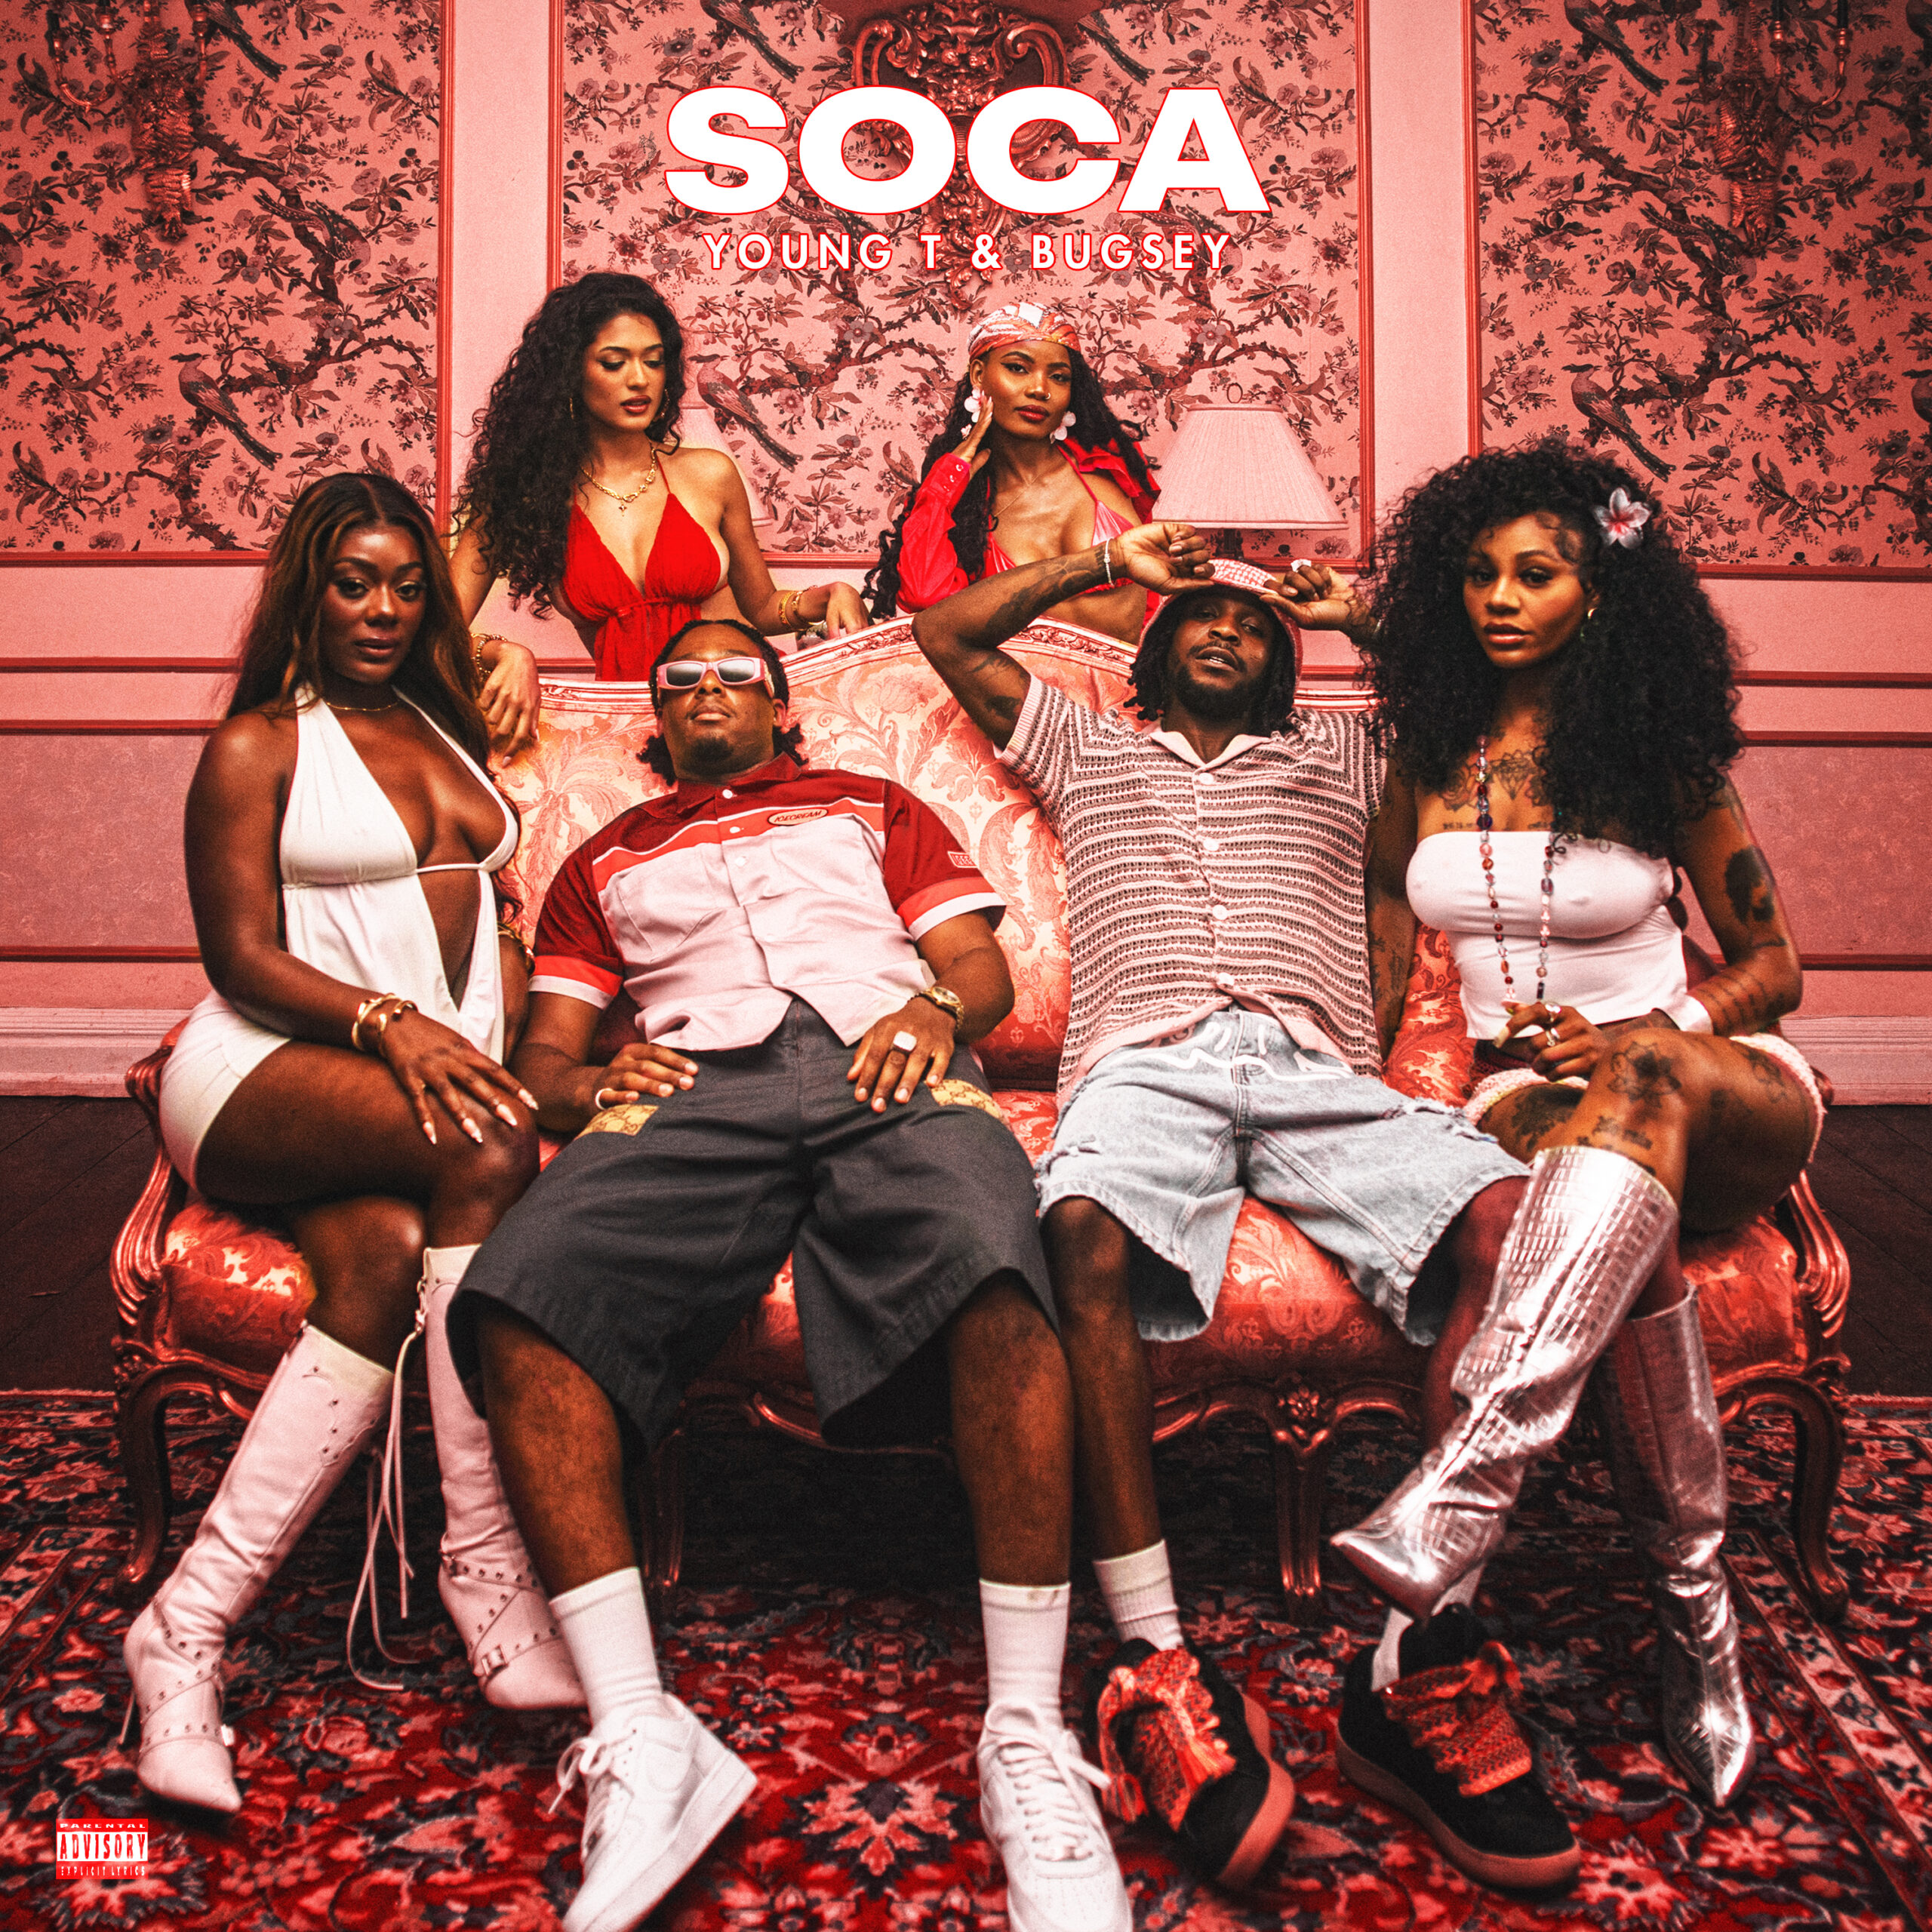 Young T & Bugsey Drop New Banger "SOCA"